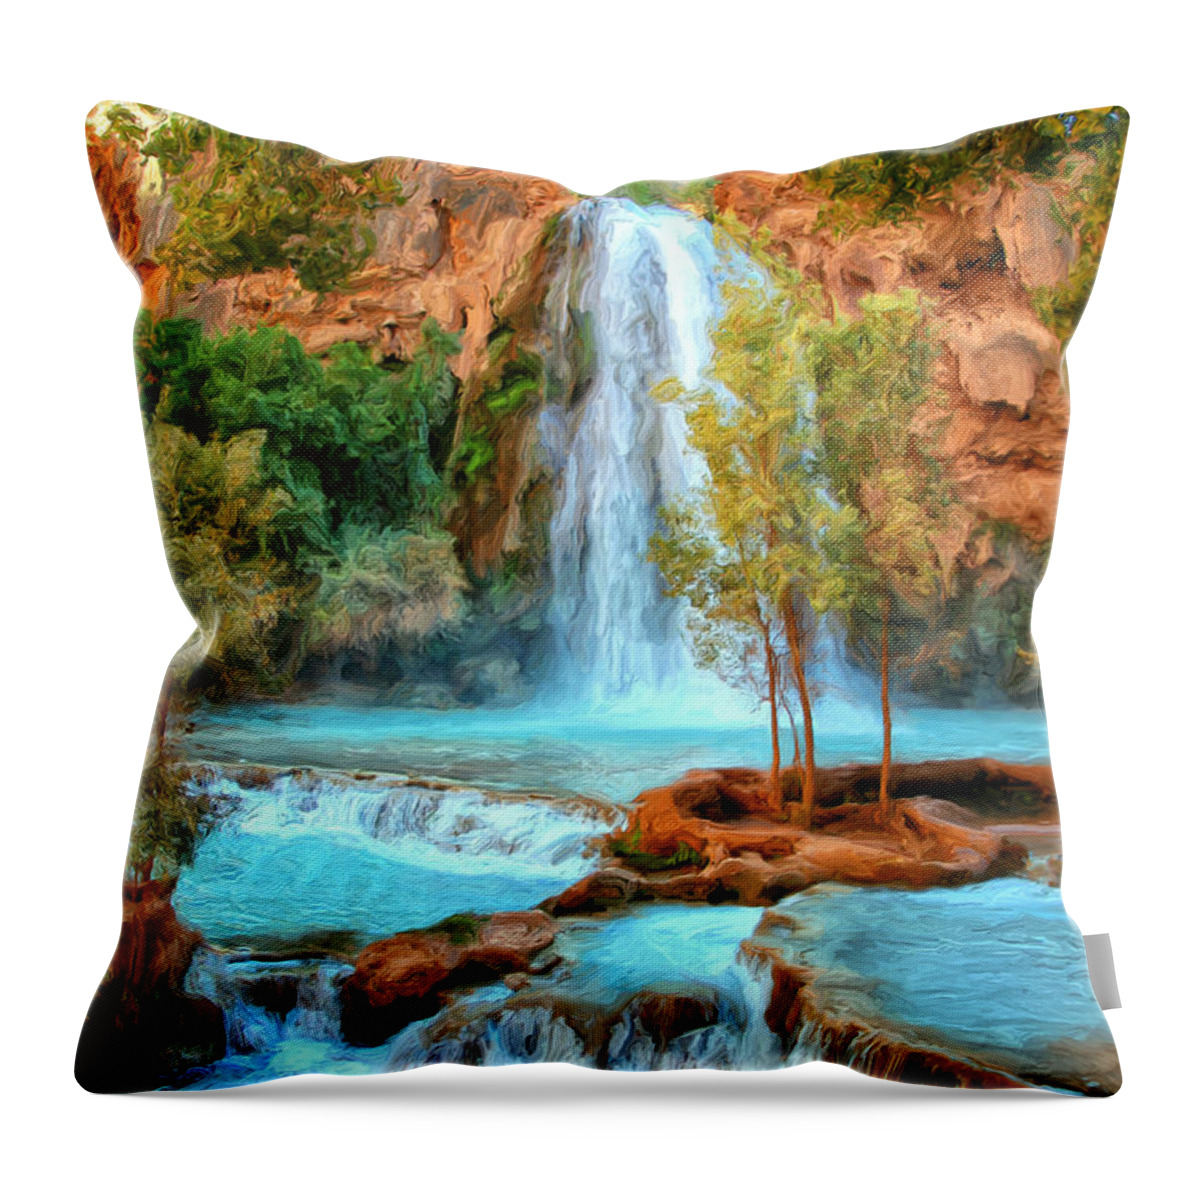 Blue Pool At Havasupai Falls Throw Pillow for Sale by Dominic Piperata